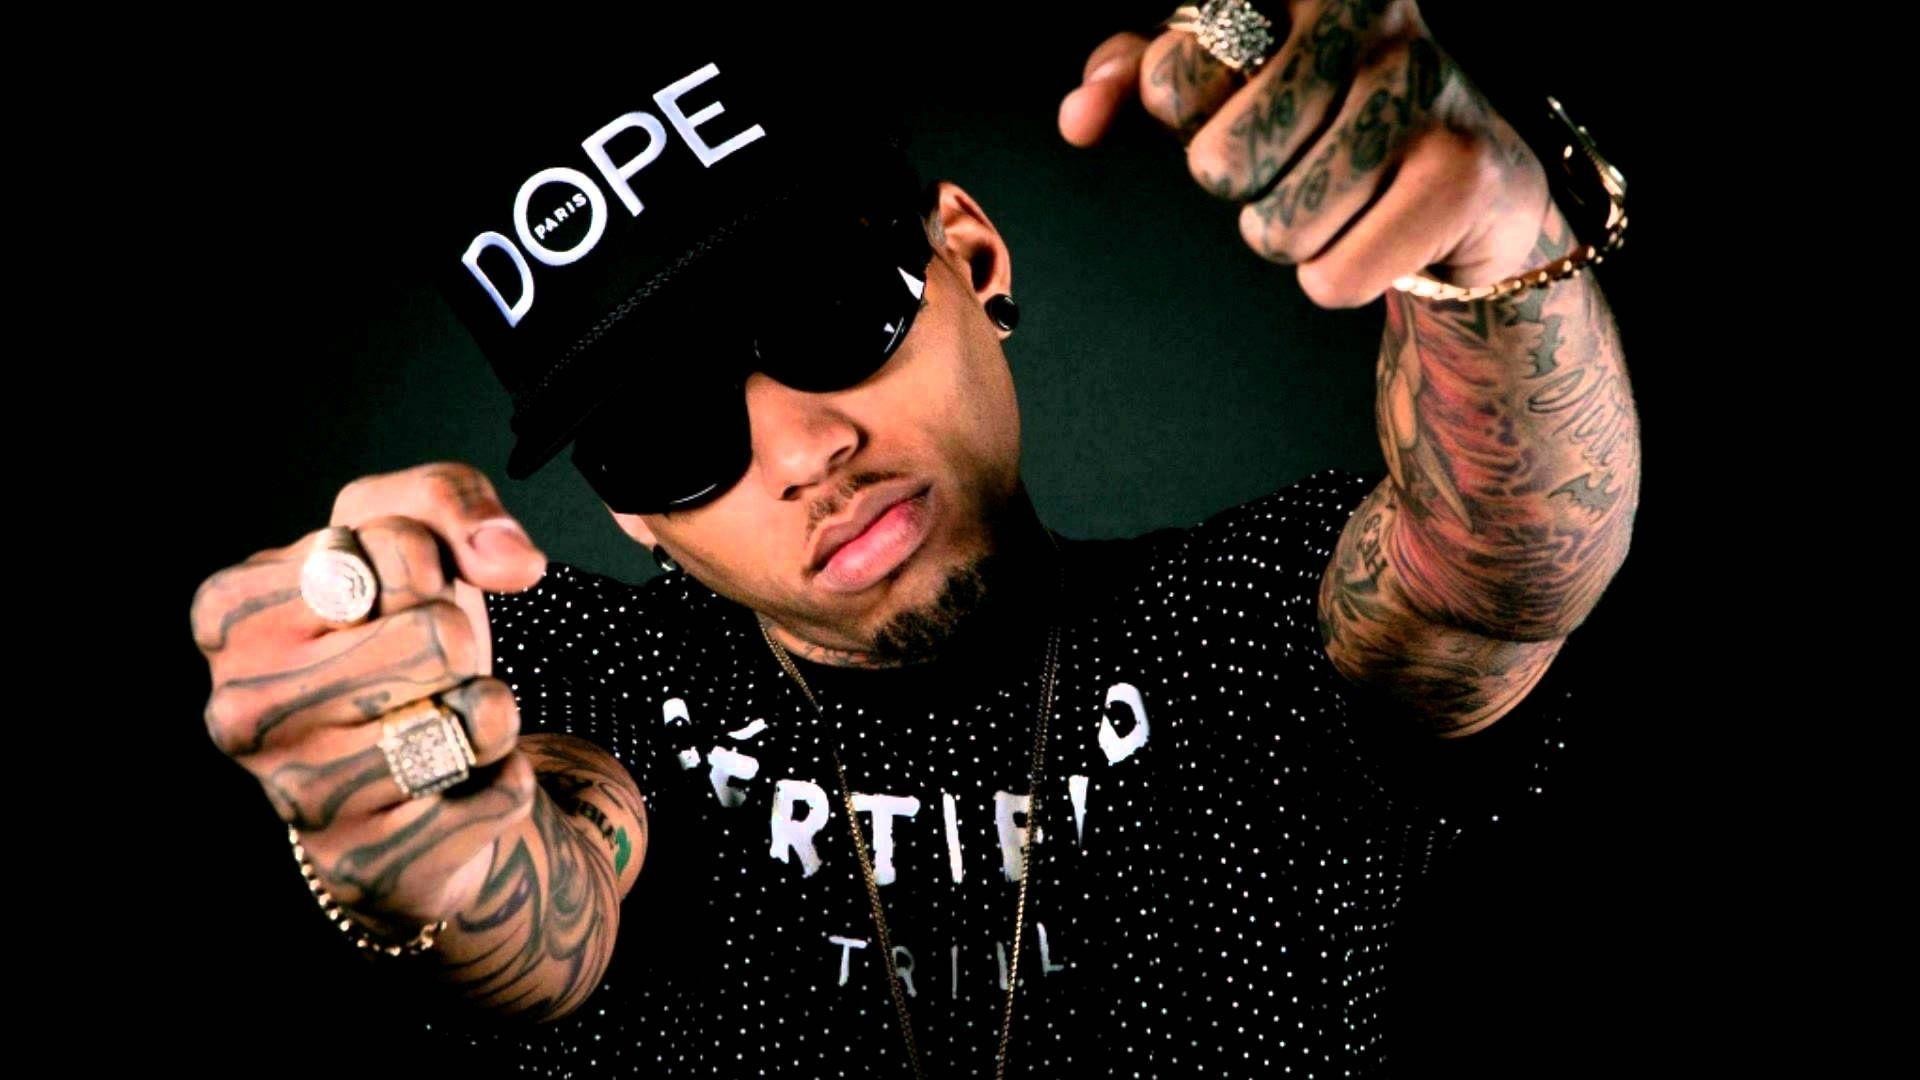 1920x1080 Kid Ink Live Images, HD Wallpapers - BsnSCB